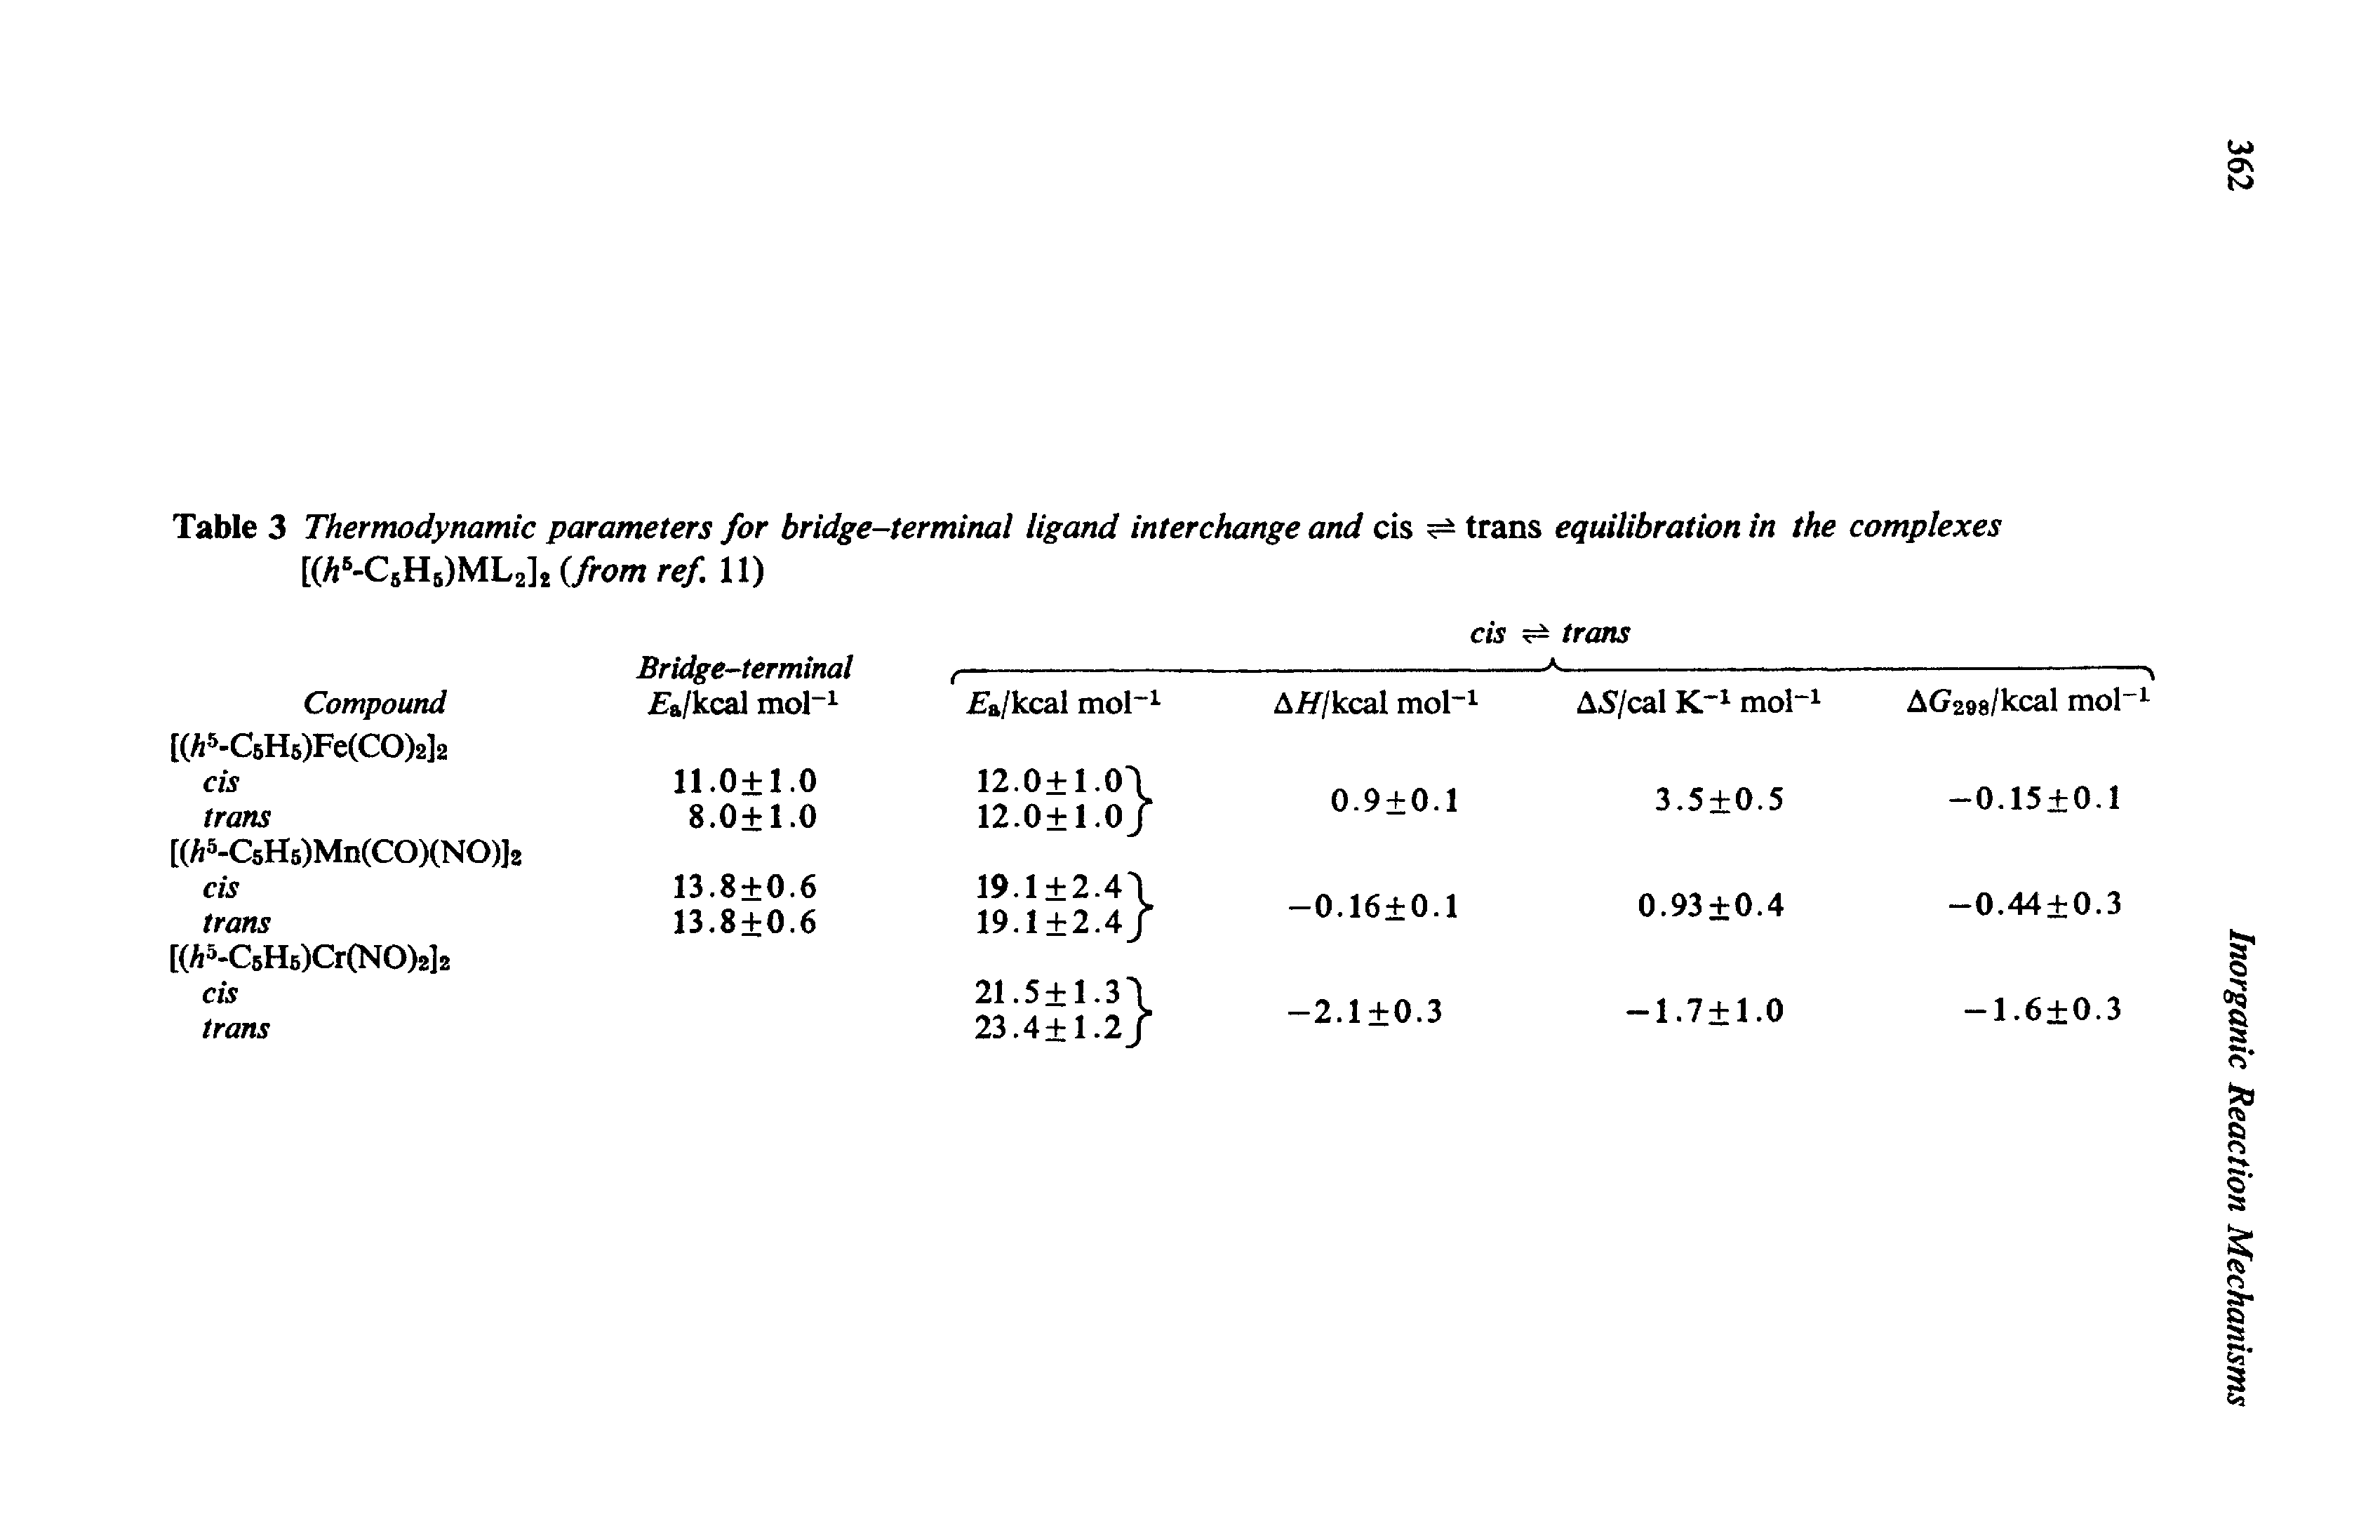 Table 3 Thermodynamic parameters for bridge-terminal ligand interchange and cis trans equilibration in the complexes [(/j >-C5H5)ML2] from ref 11)...